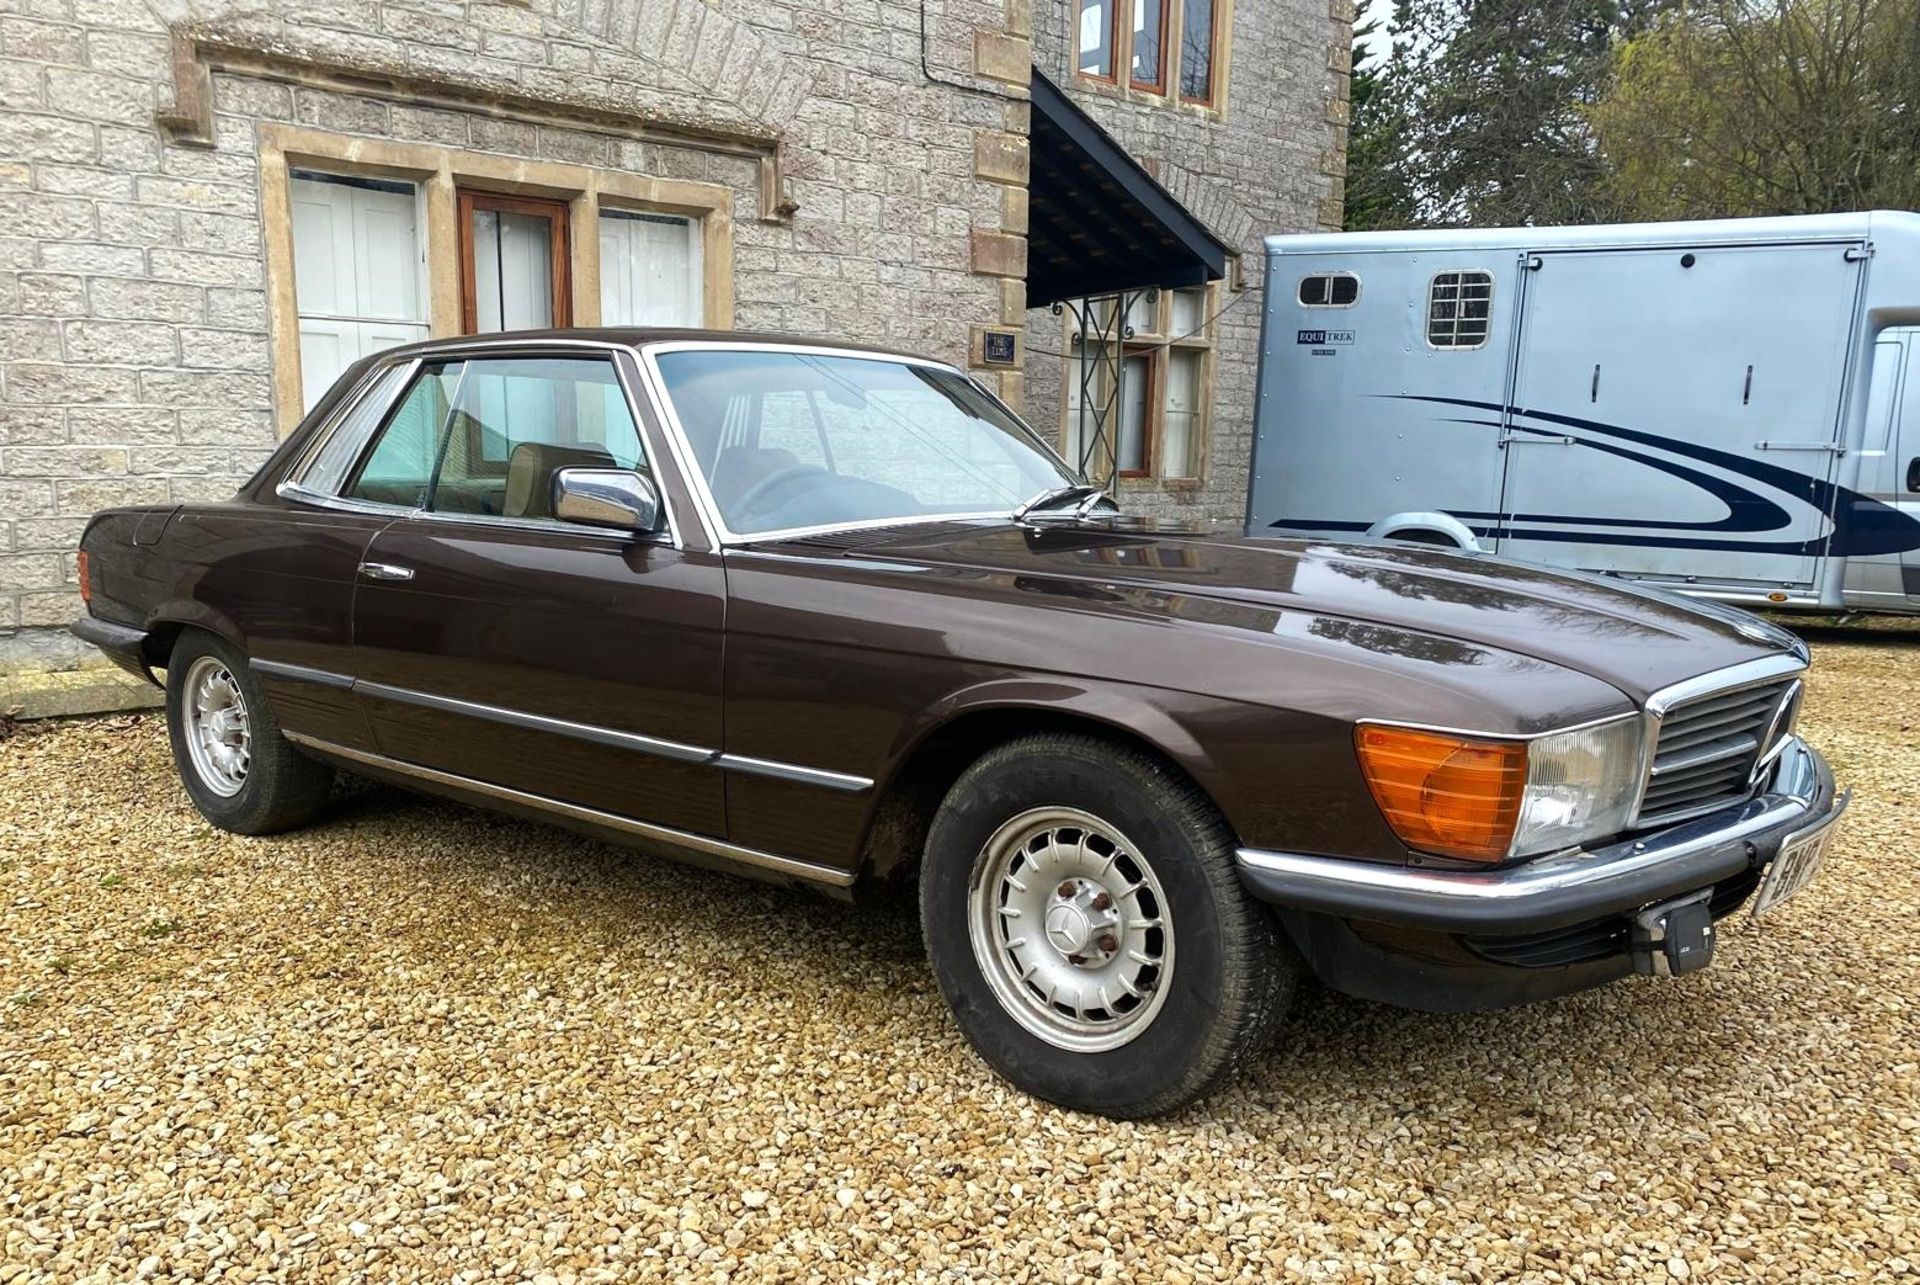 1980 MERCEDES-BENZ 380SLC Registration Number: BWP 946M Chassis Number: 107.025.22.000320 Recorded